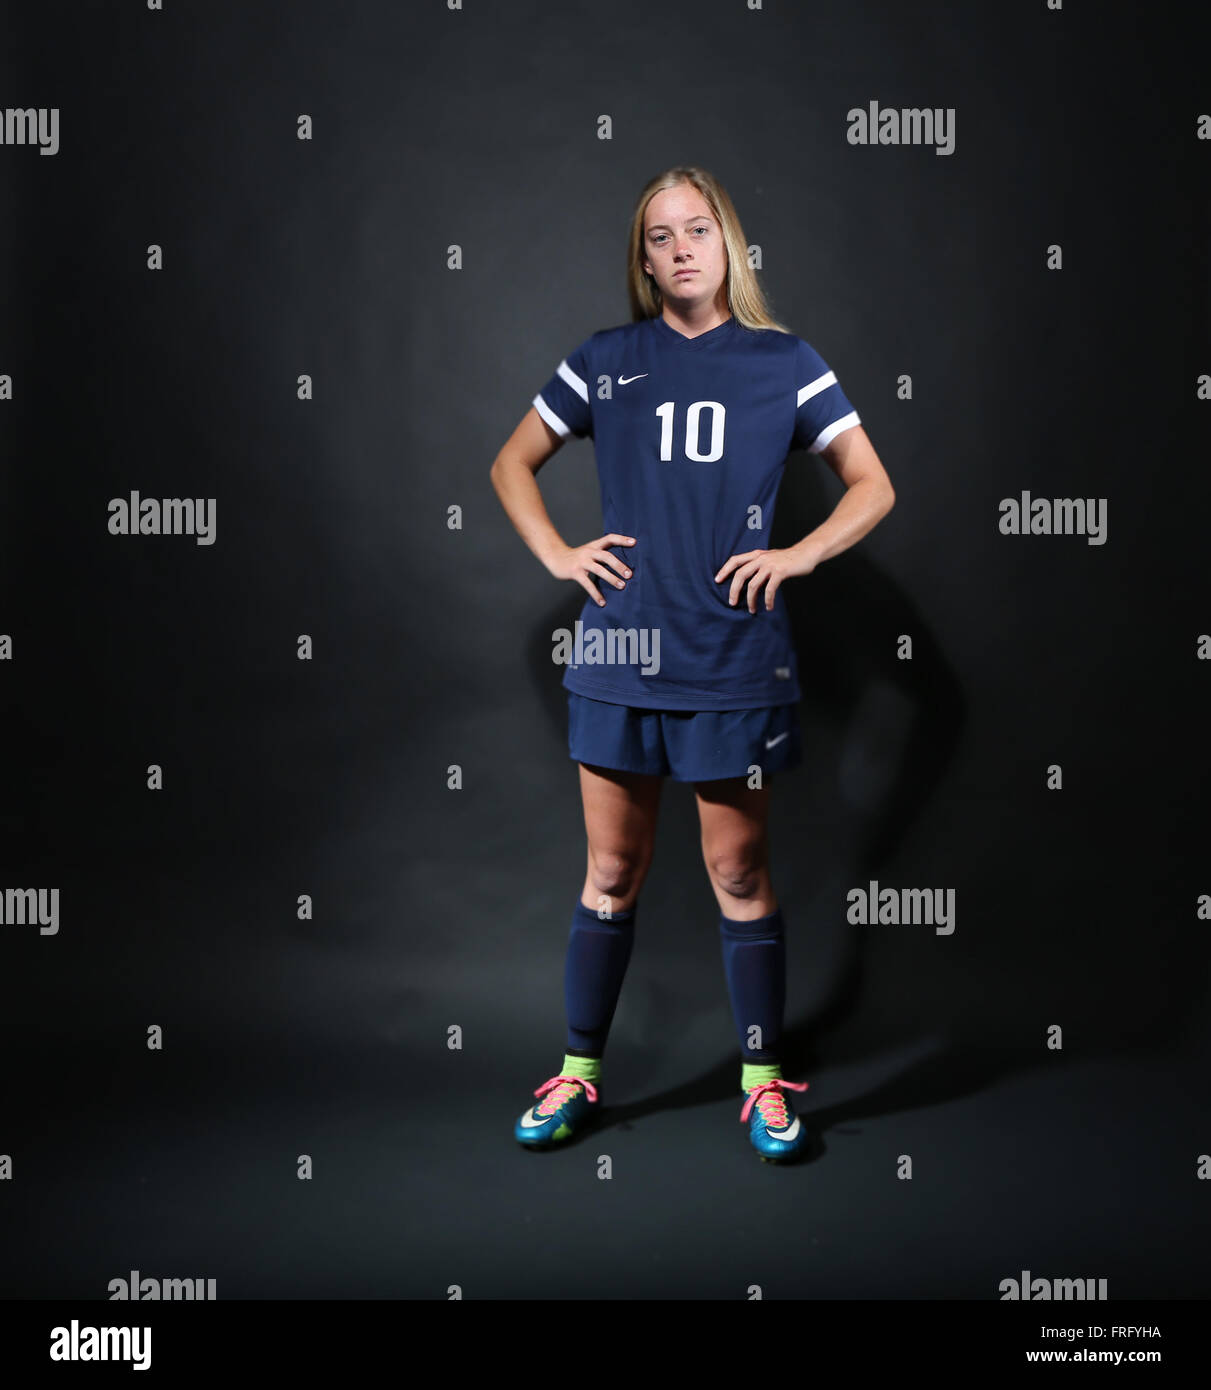 Clearwater, Florida, USA. 22nd Mar, 2016. DOUGLAS R. CLIFFORD.Land O' Lakes High School midfielder Sydny Nasello, 15, is the Times' North Suncoast girls soccer player of the year. © Douglas R. Clifford/Tampa Bay Times/ZUMA Wire/Alamy Live News Stock Photo